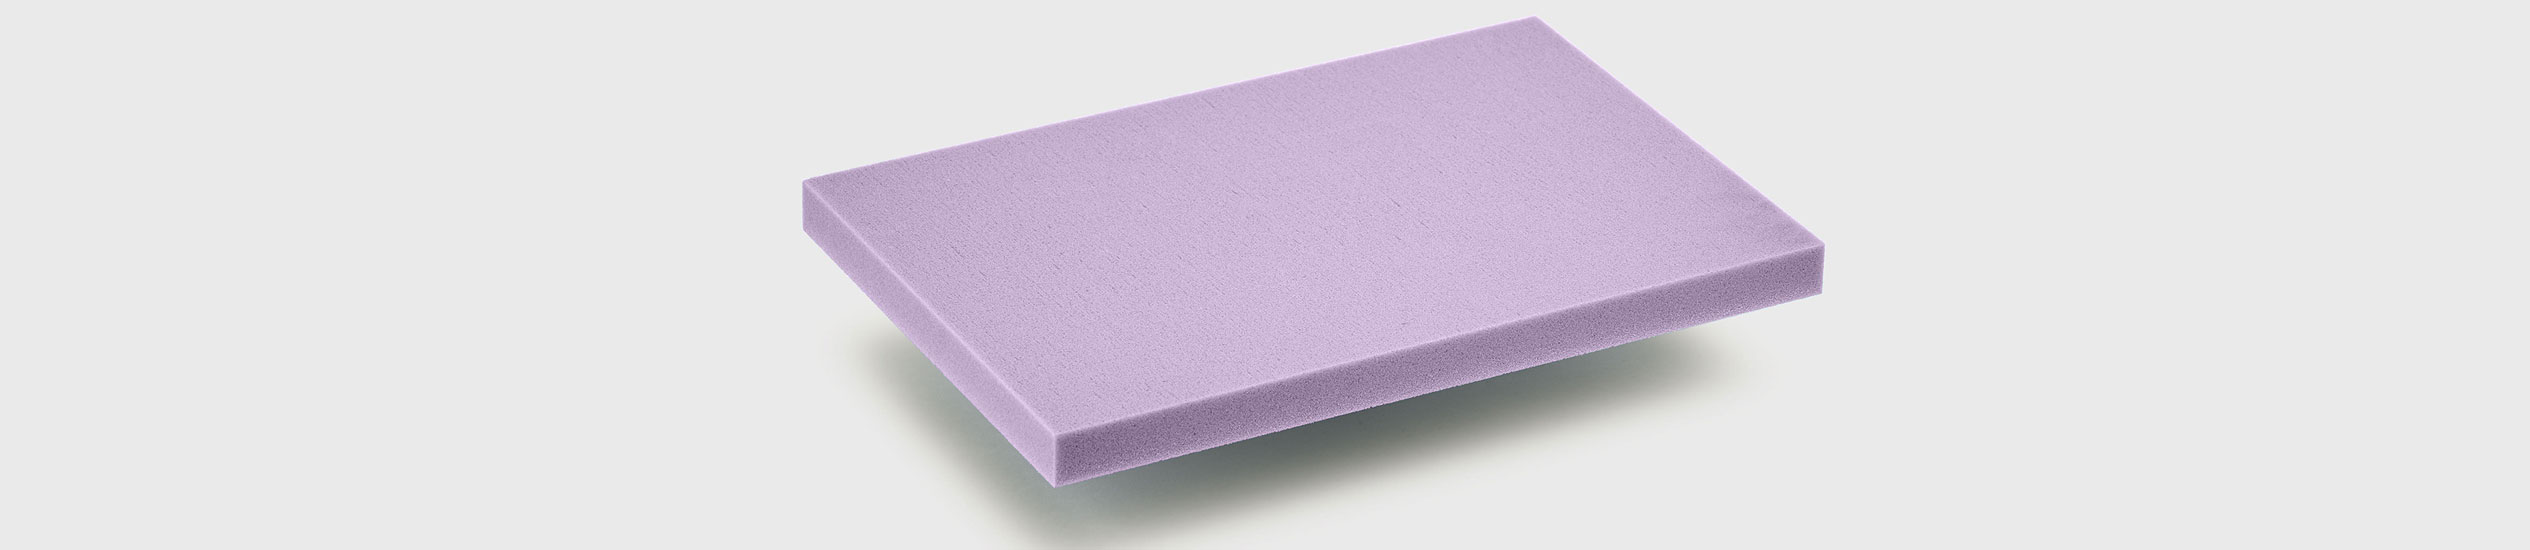 PVC foam offers optimal stiffness-to-weight-ratio, good impact strength, water resistance, thermal insulation, low resin absorption and high fatigue resistance